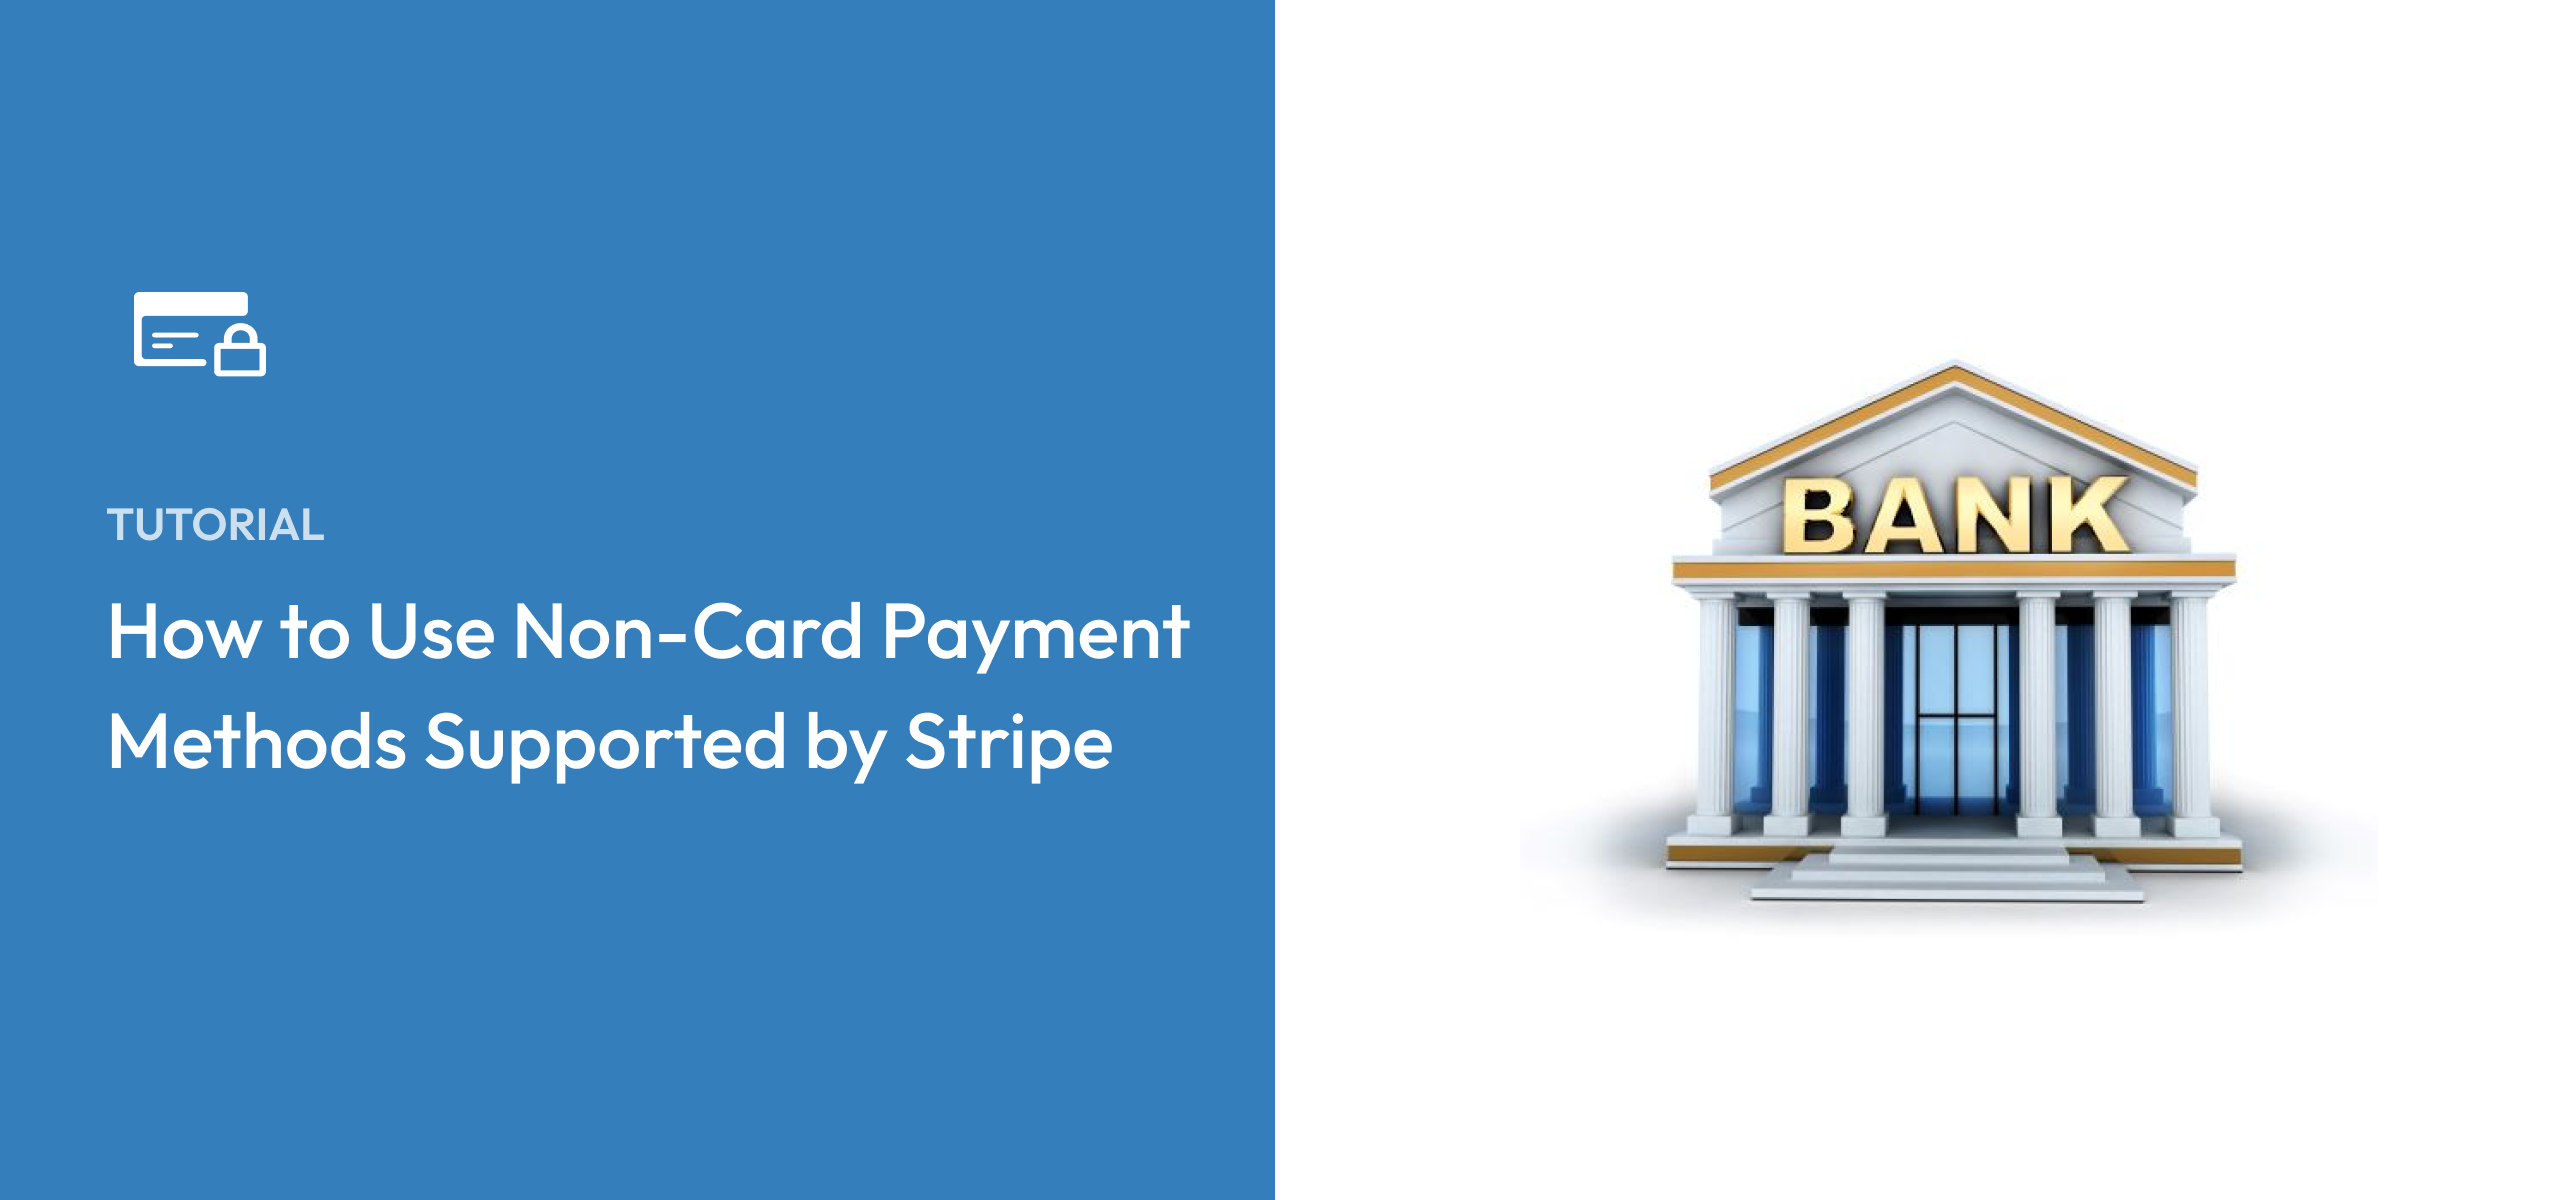 How to Use Non-Card Payment Methods Supported by Stripe